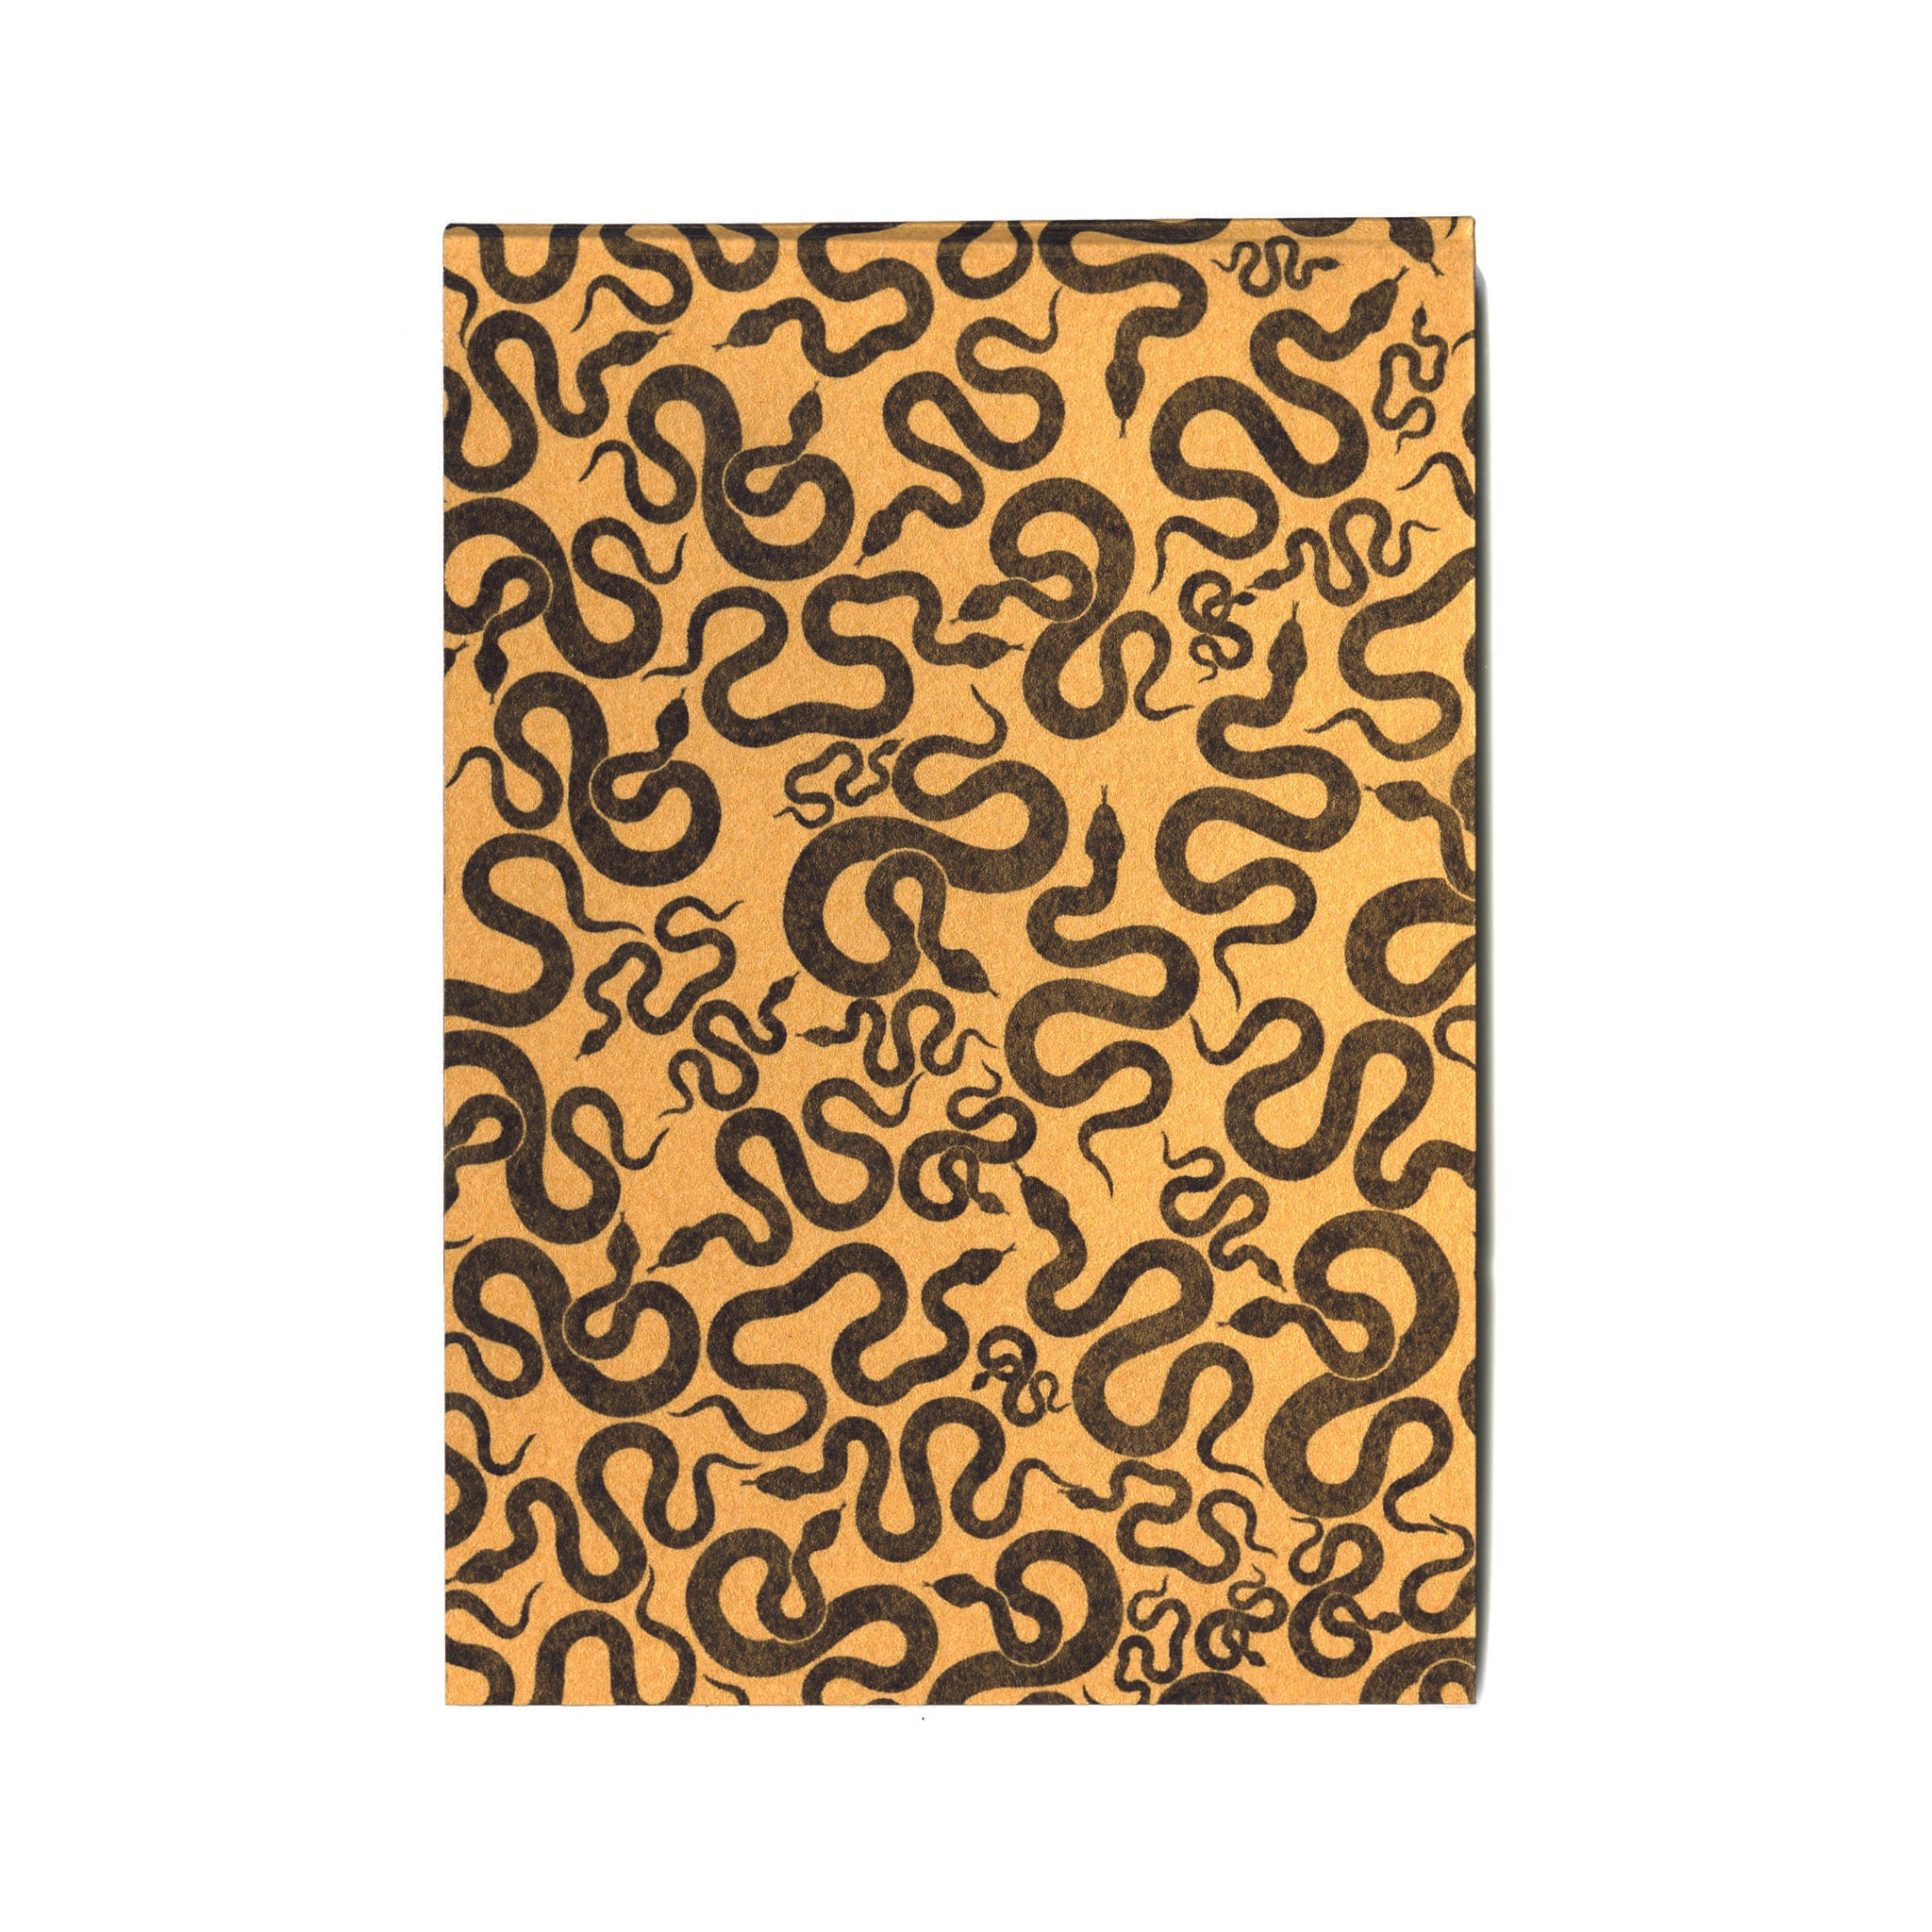 Pocket mini journal with yellow original snake design serpent cover & 100% cotton paper pages